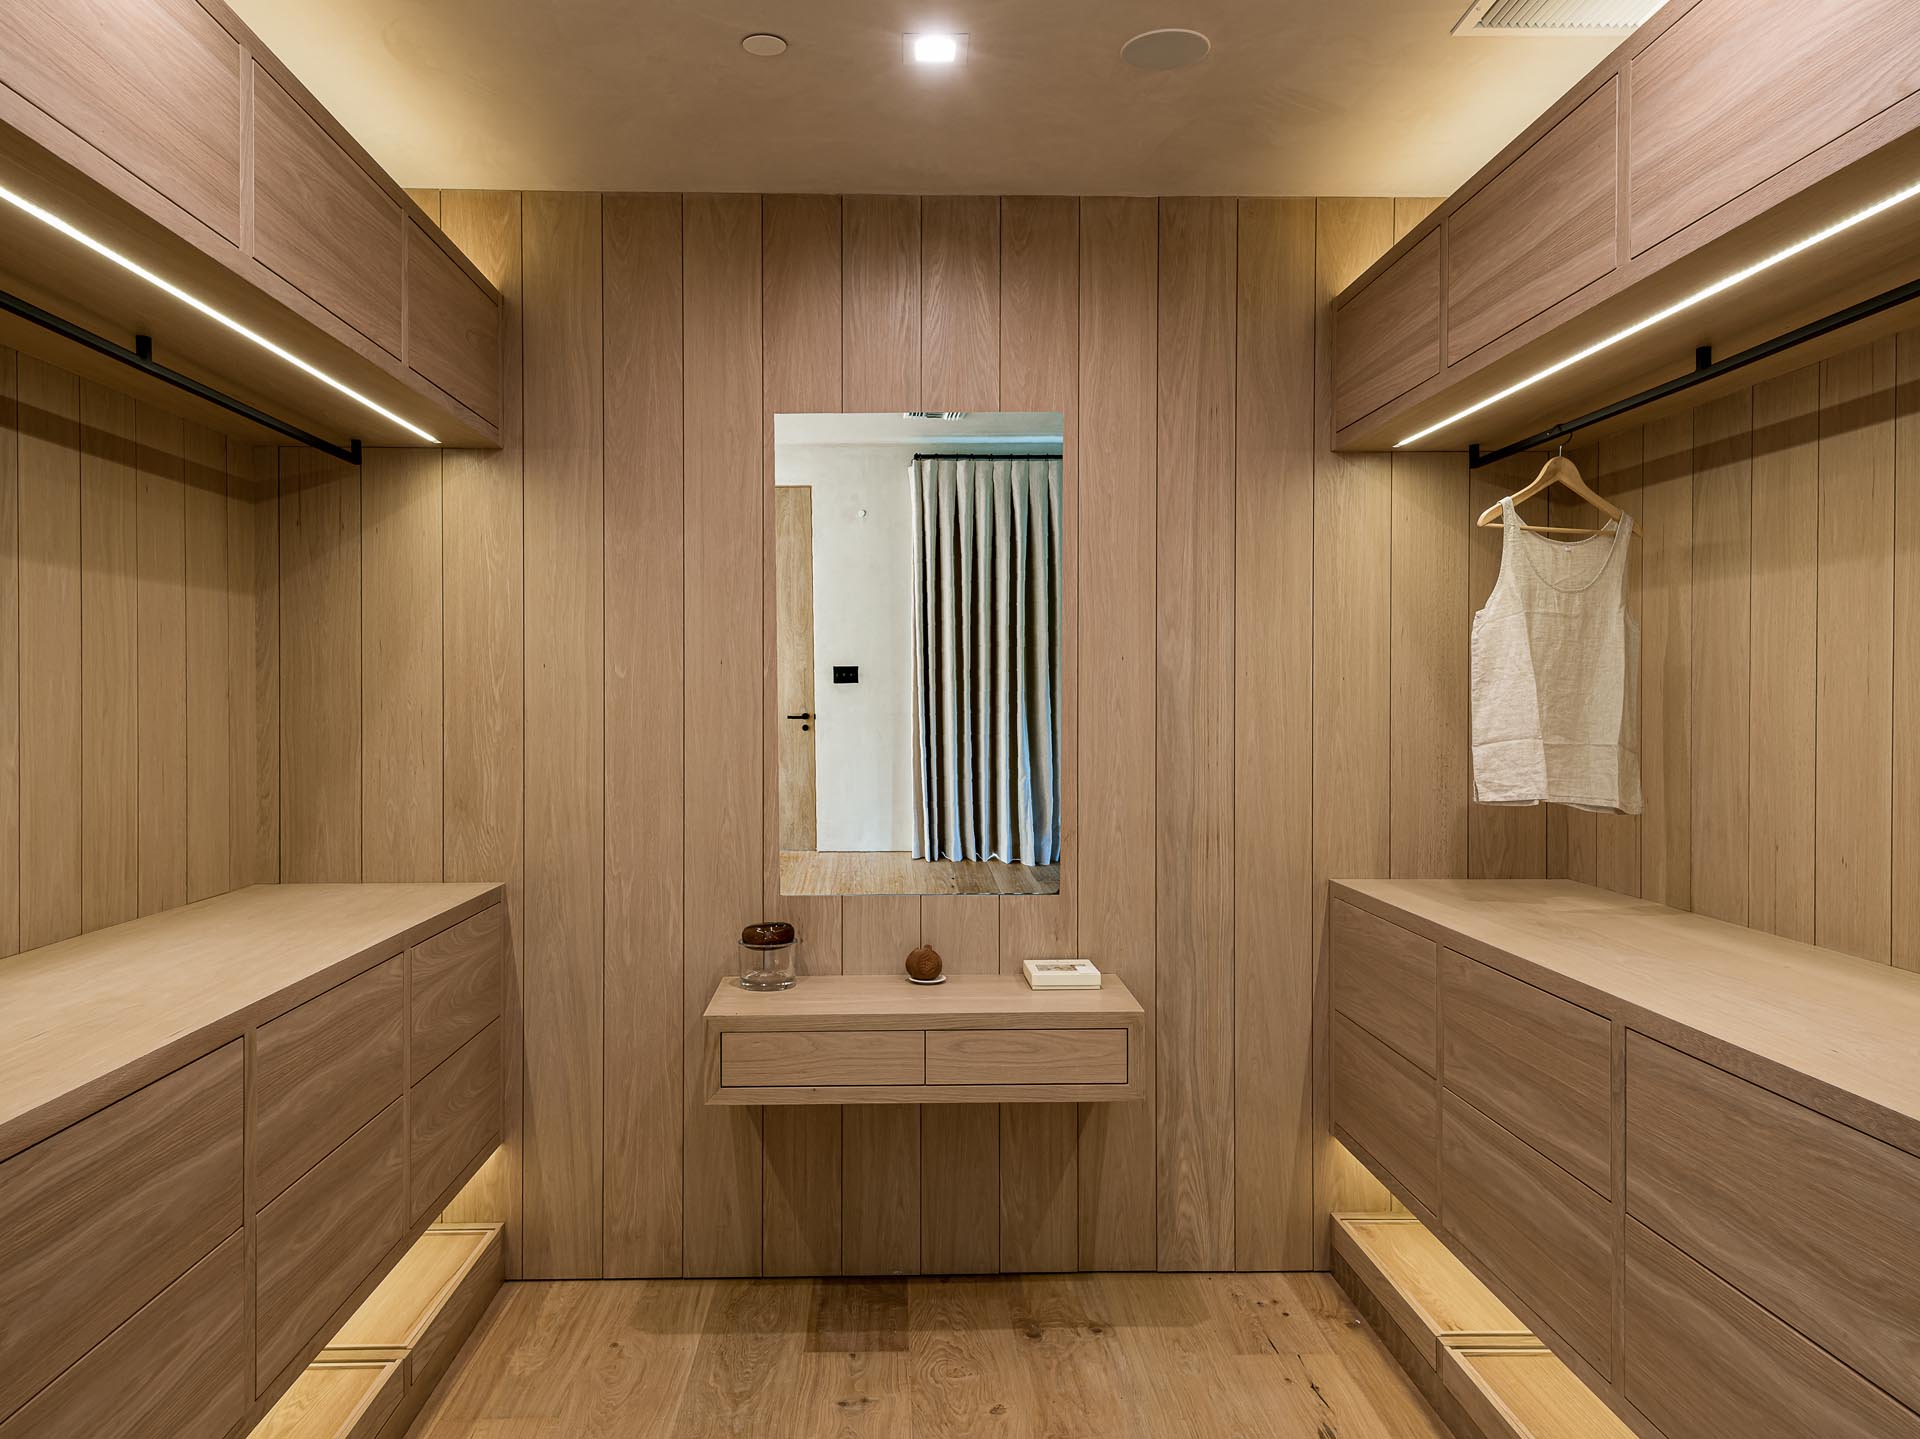 A walk-in closet lined with wood has a floating vanity.